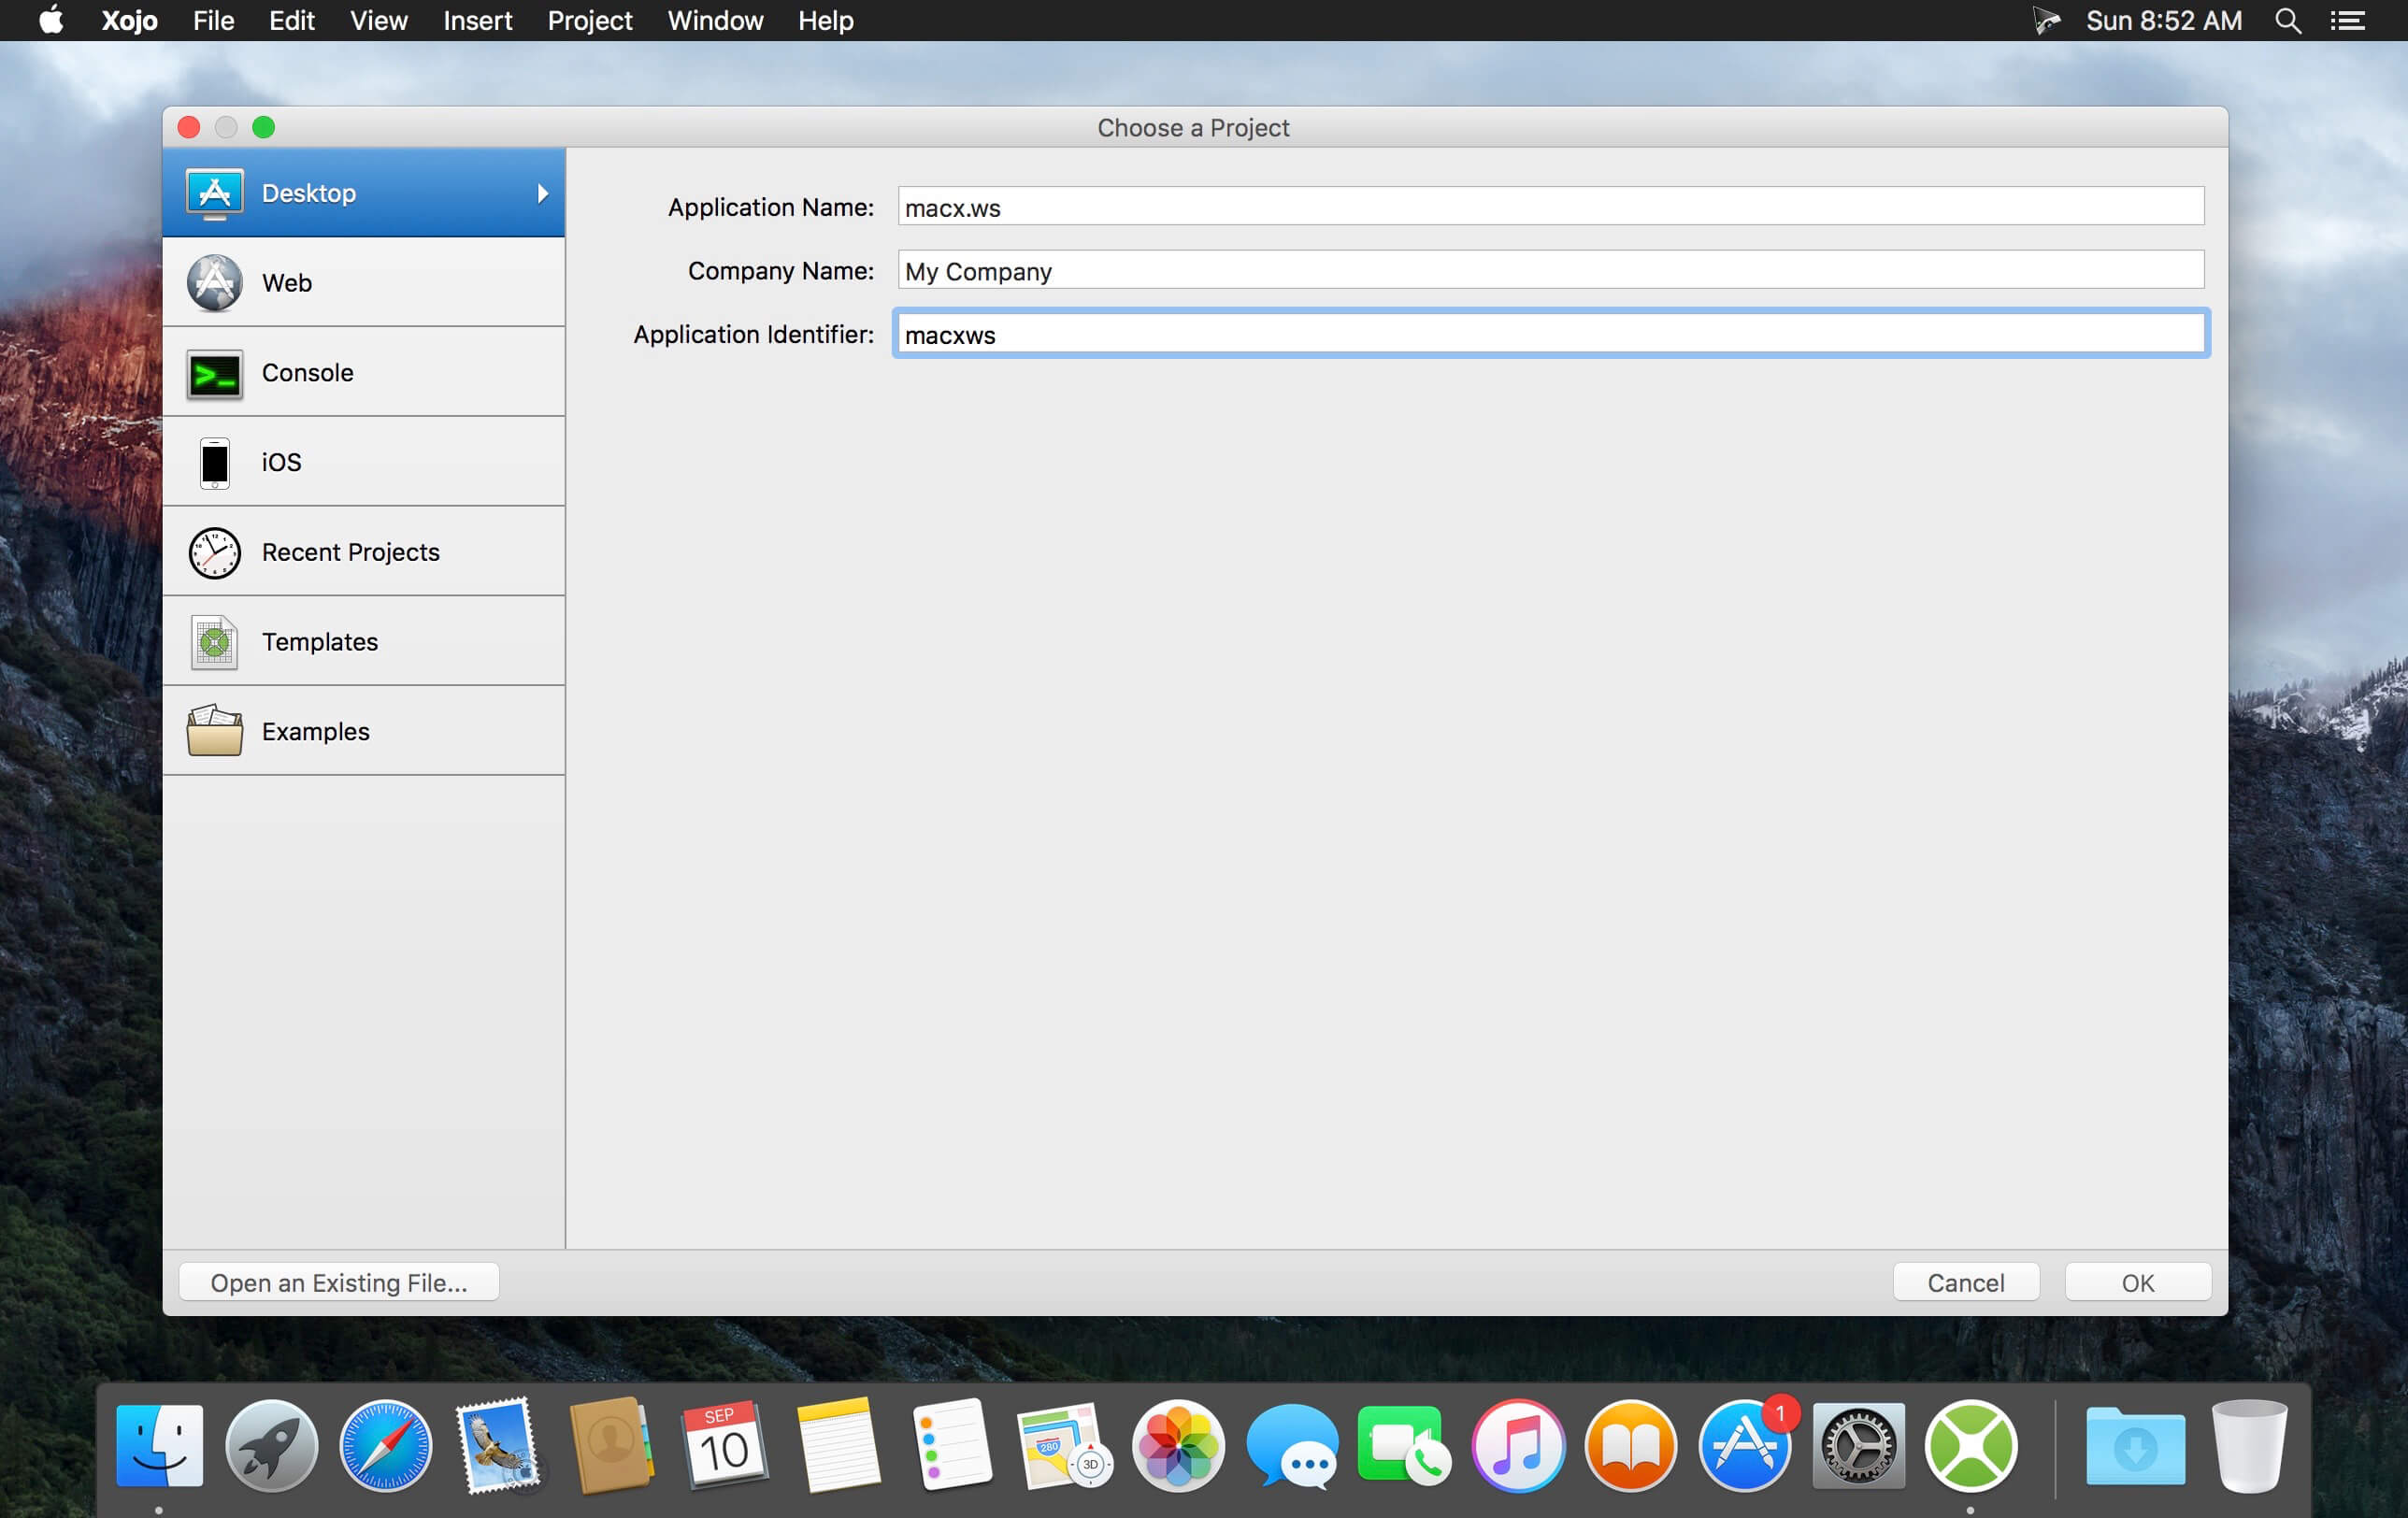 vmware tools for os x download